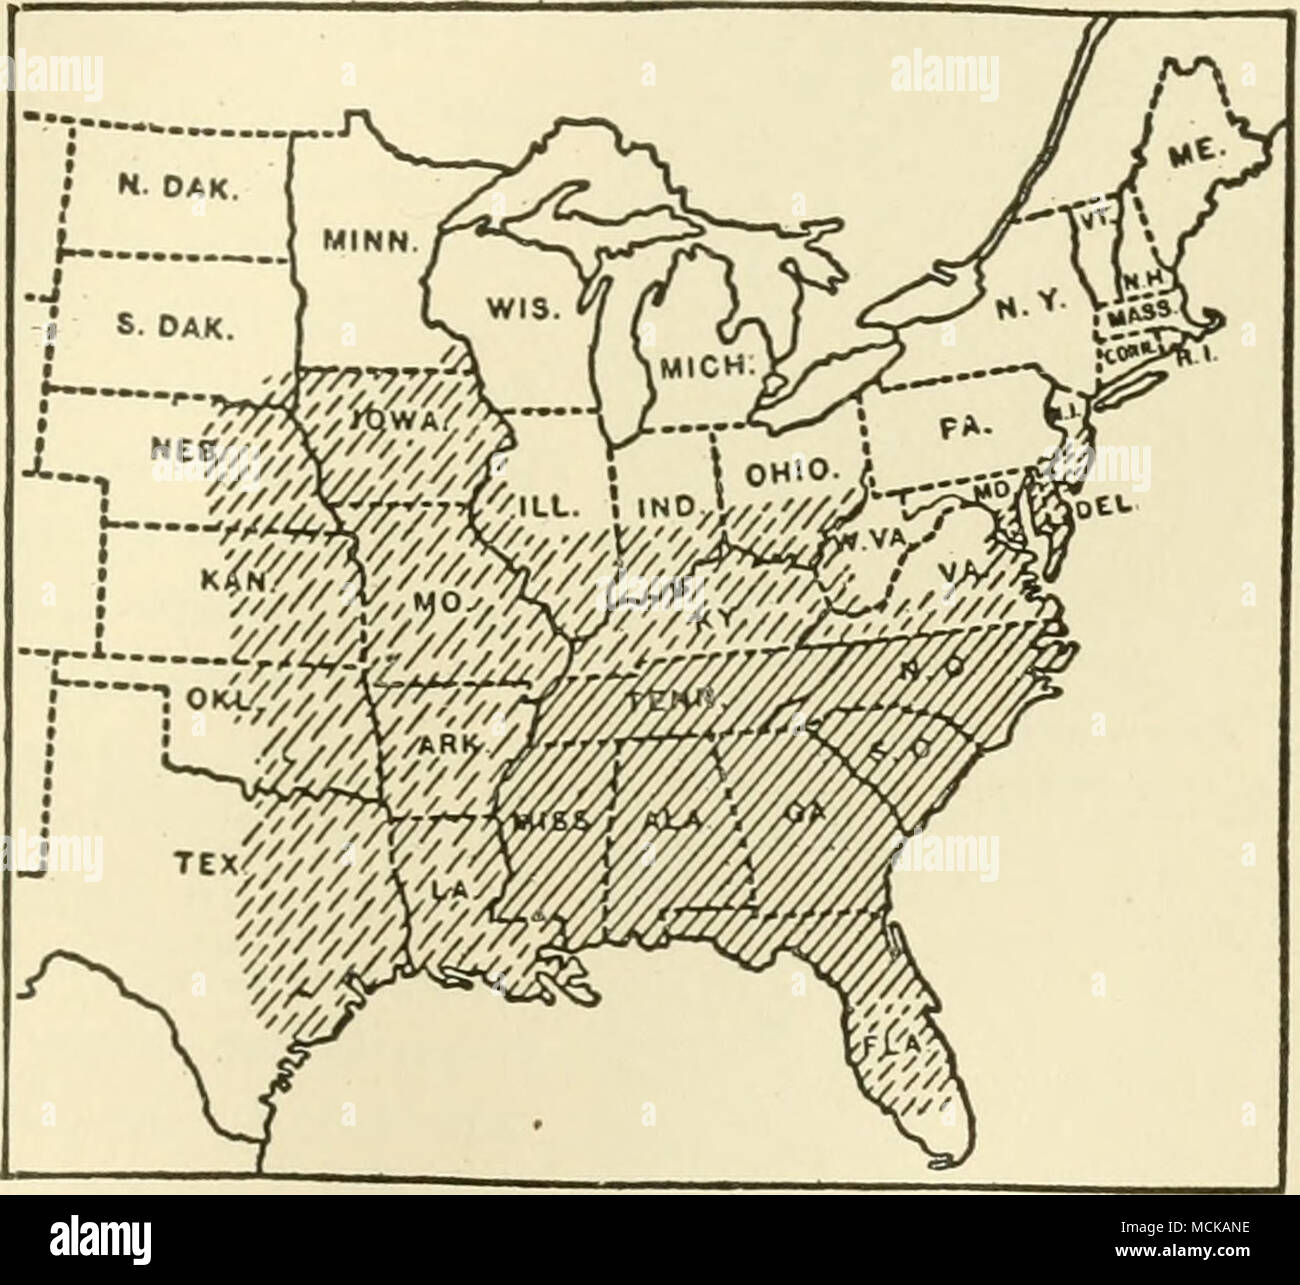 . FiG. 154. — Map showing the distribution of Physo- derma zeae-maydis in the United States. Broken lines, P. zeae-maydis present: solid line, P. zese-maydis caus- ing damage. After Tisdale. cence of many spots may lead to discoloration of large areas and a rusted appearance. These diseased areas are often in bands across the leaf. Leaves are often killed. The dry epidermis eventually ruptures over diseased spots and the dusty, brown spores are freed. Diseased stems break easily, resulting in considerable lodging of the corn. General san- itary measures are recommended, chiefly destruction of  Stock Photo